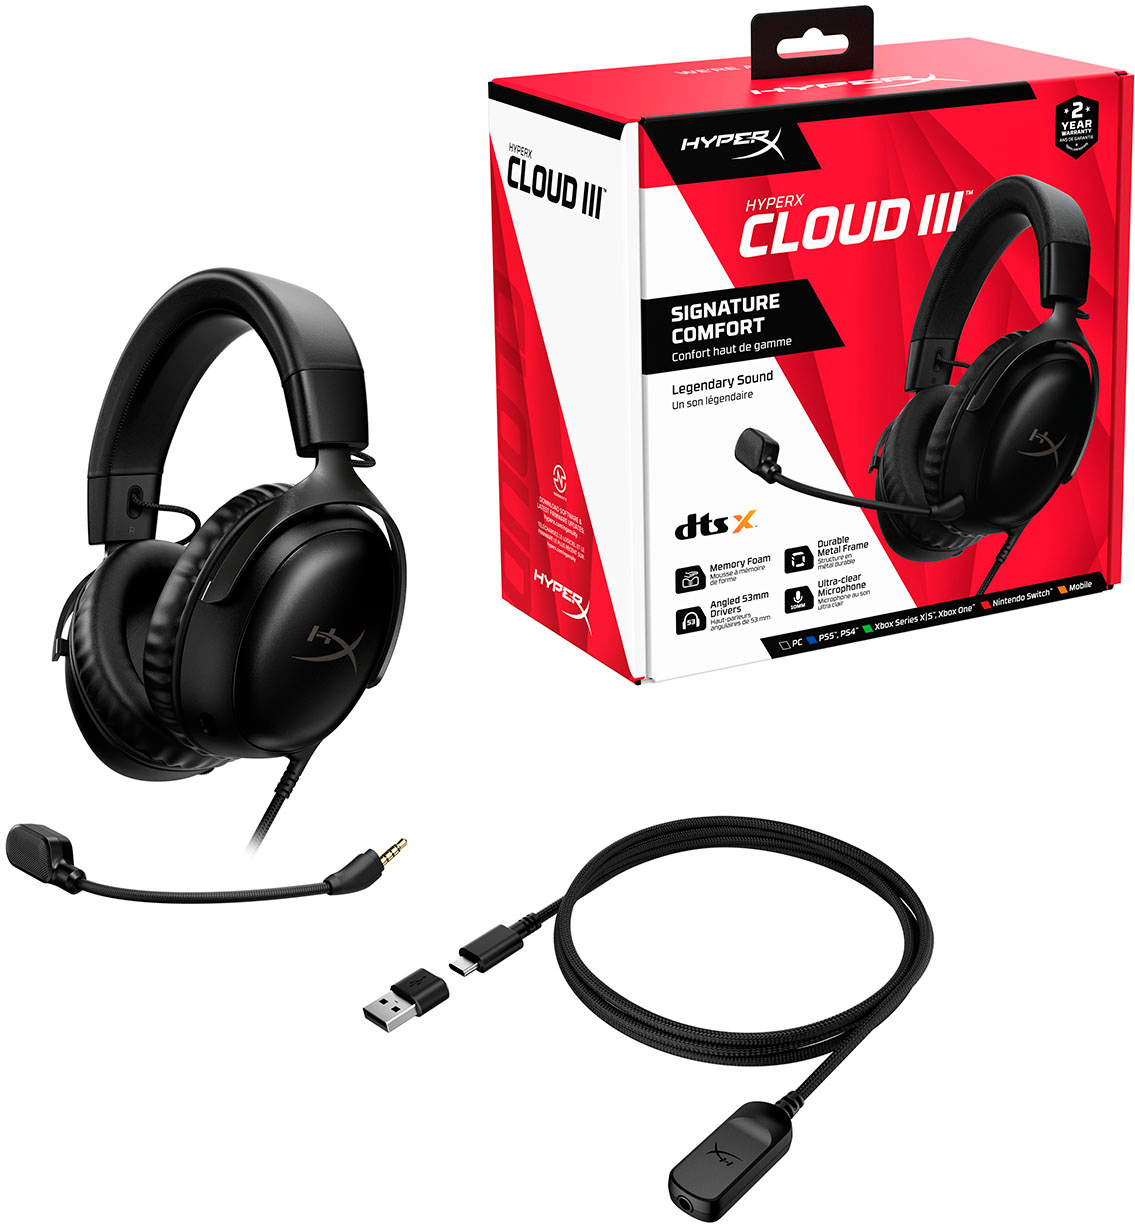 HyperX: Cloud III - WIRELESS Gaming Headset announced - Our pre